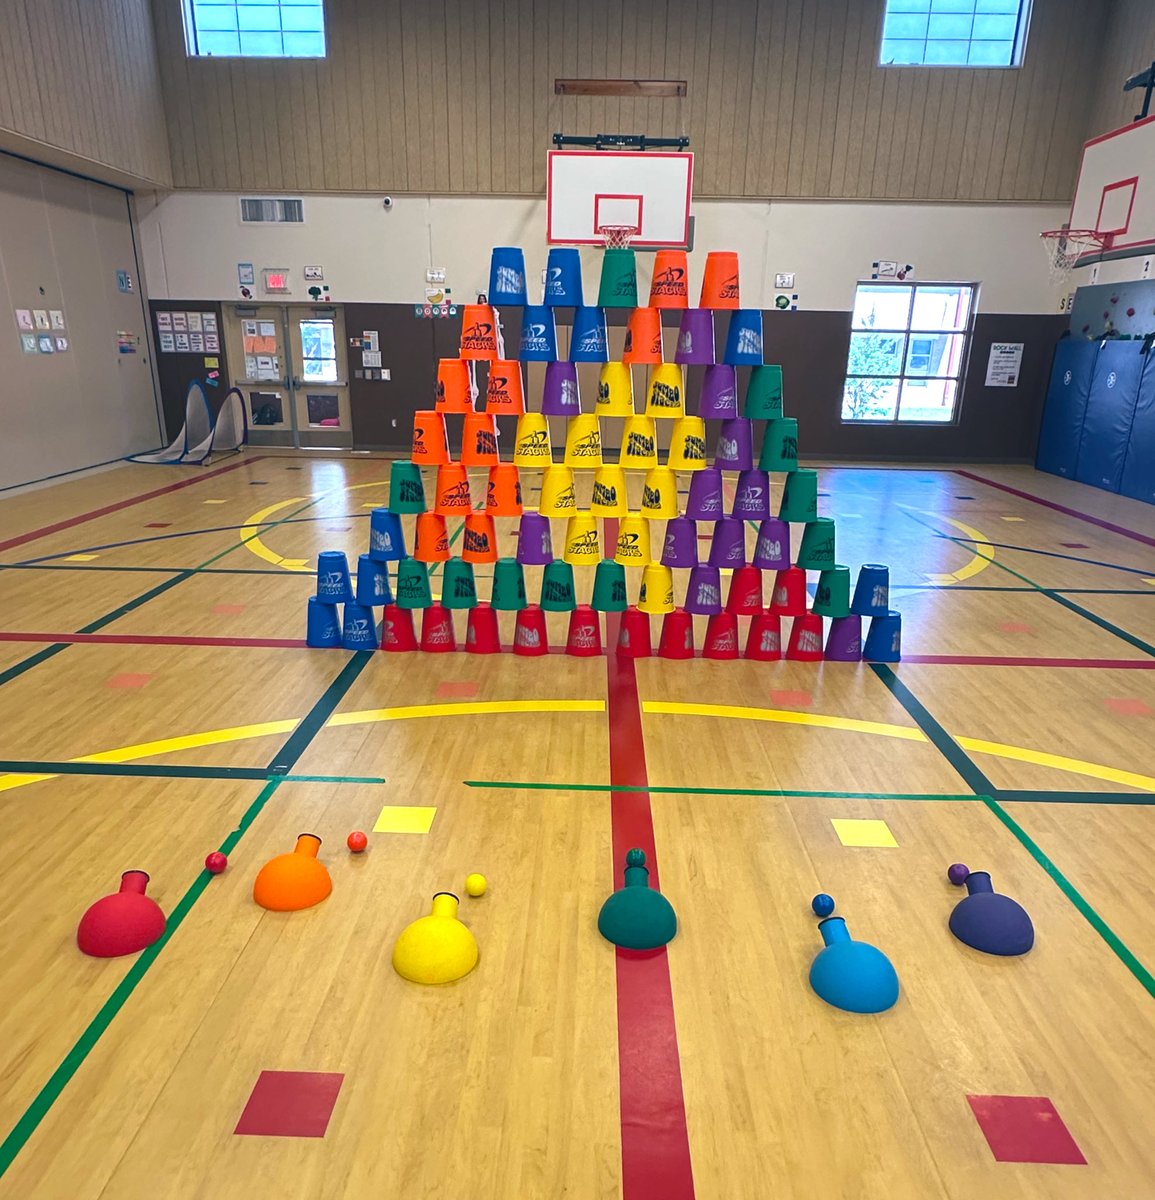 Had some fun today knocking down towers of @SpeedStacksInc Big Cups with our Cannon Launchers from @schoolhealth #PhysEd